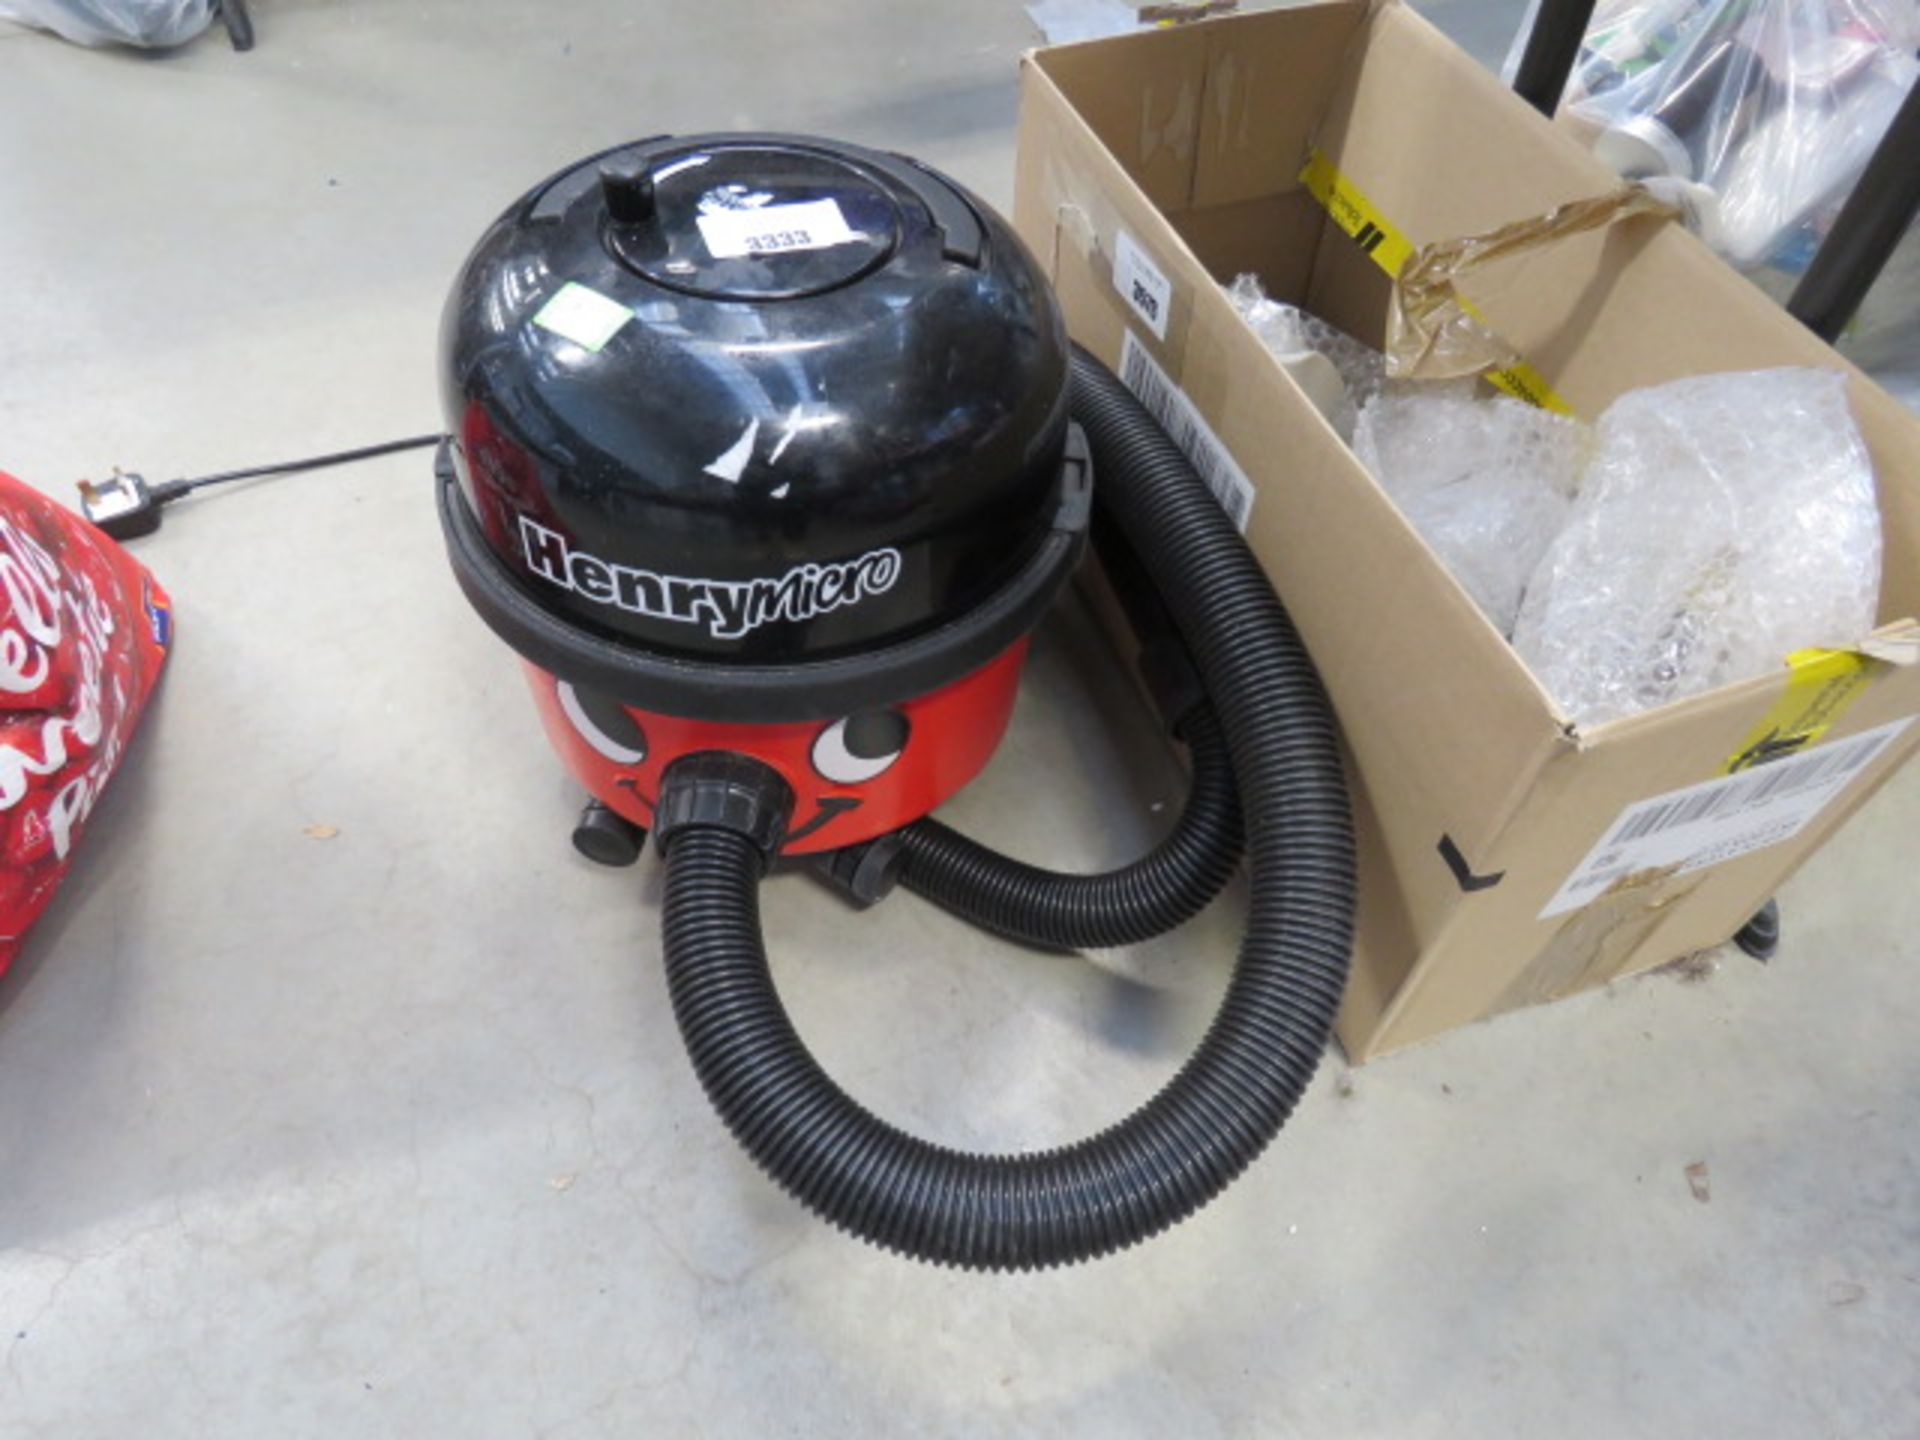 (TN215) Henry micro vacuum cleaner (no pole)